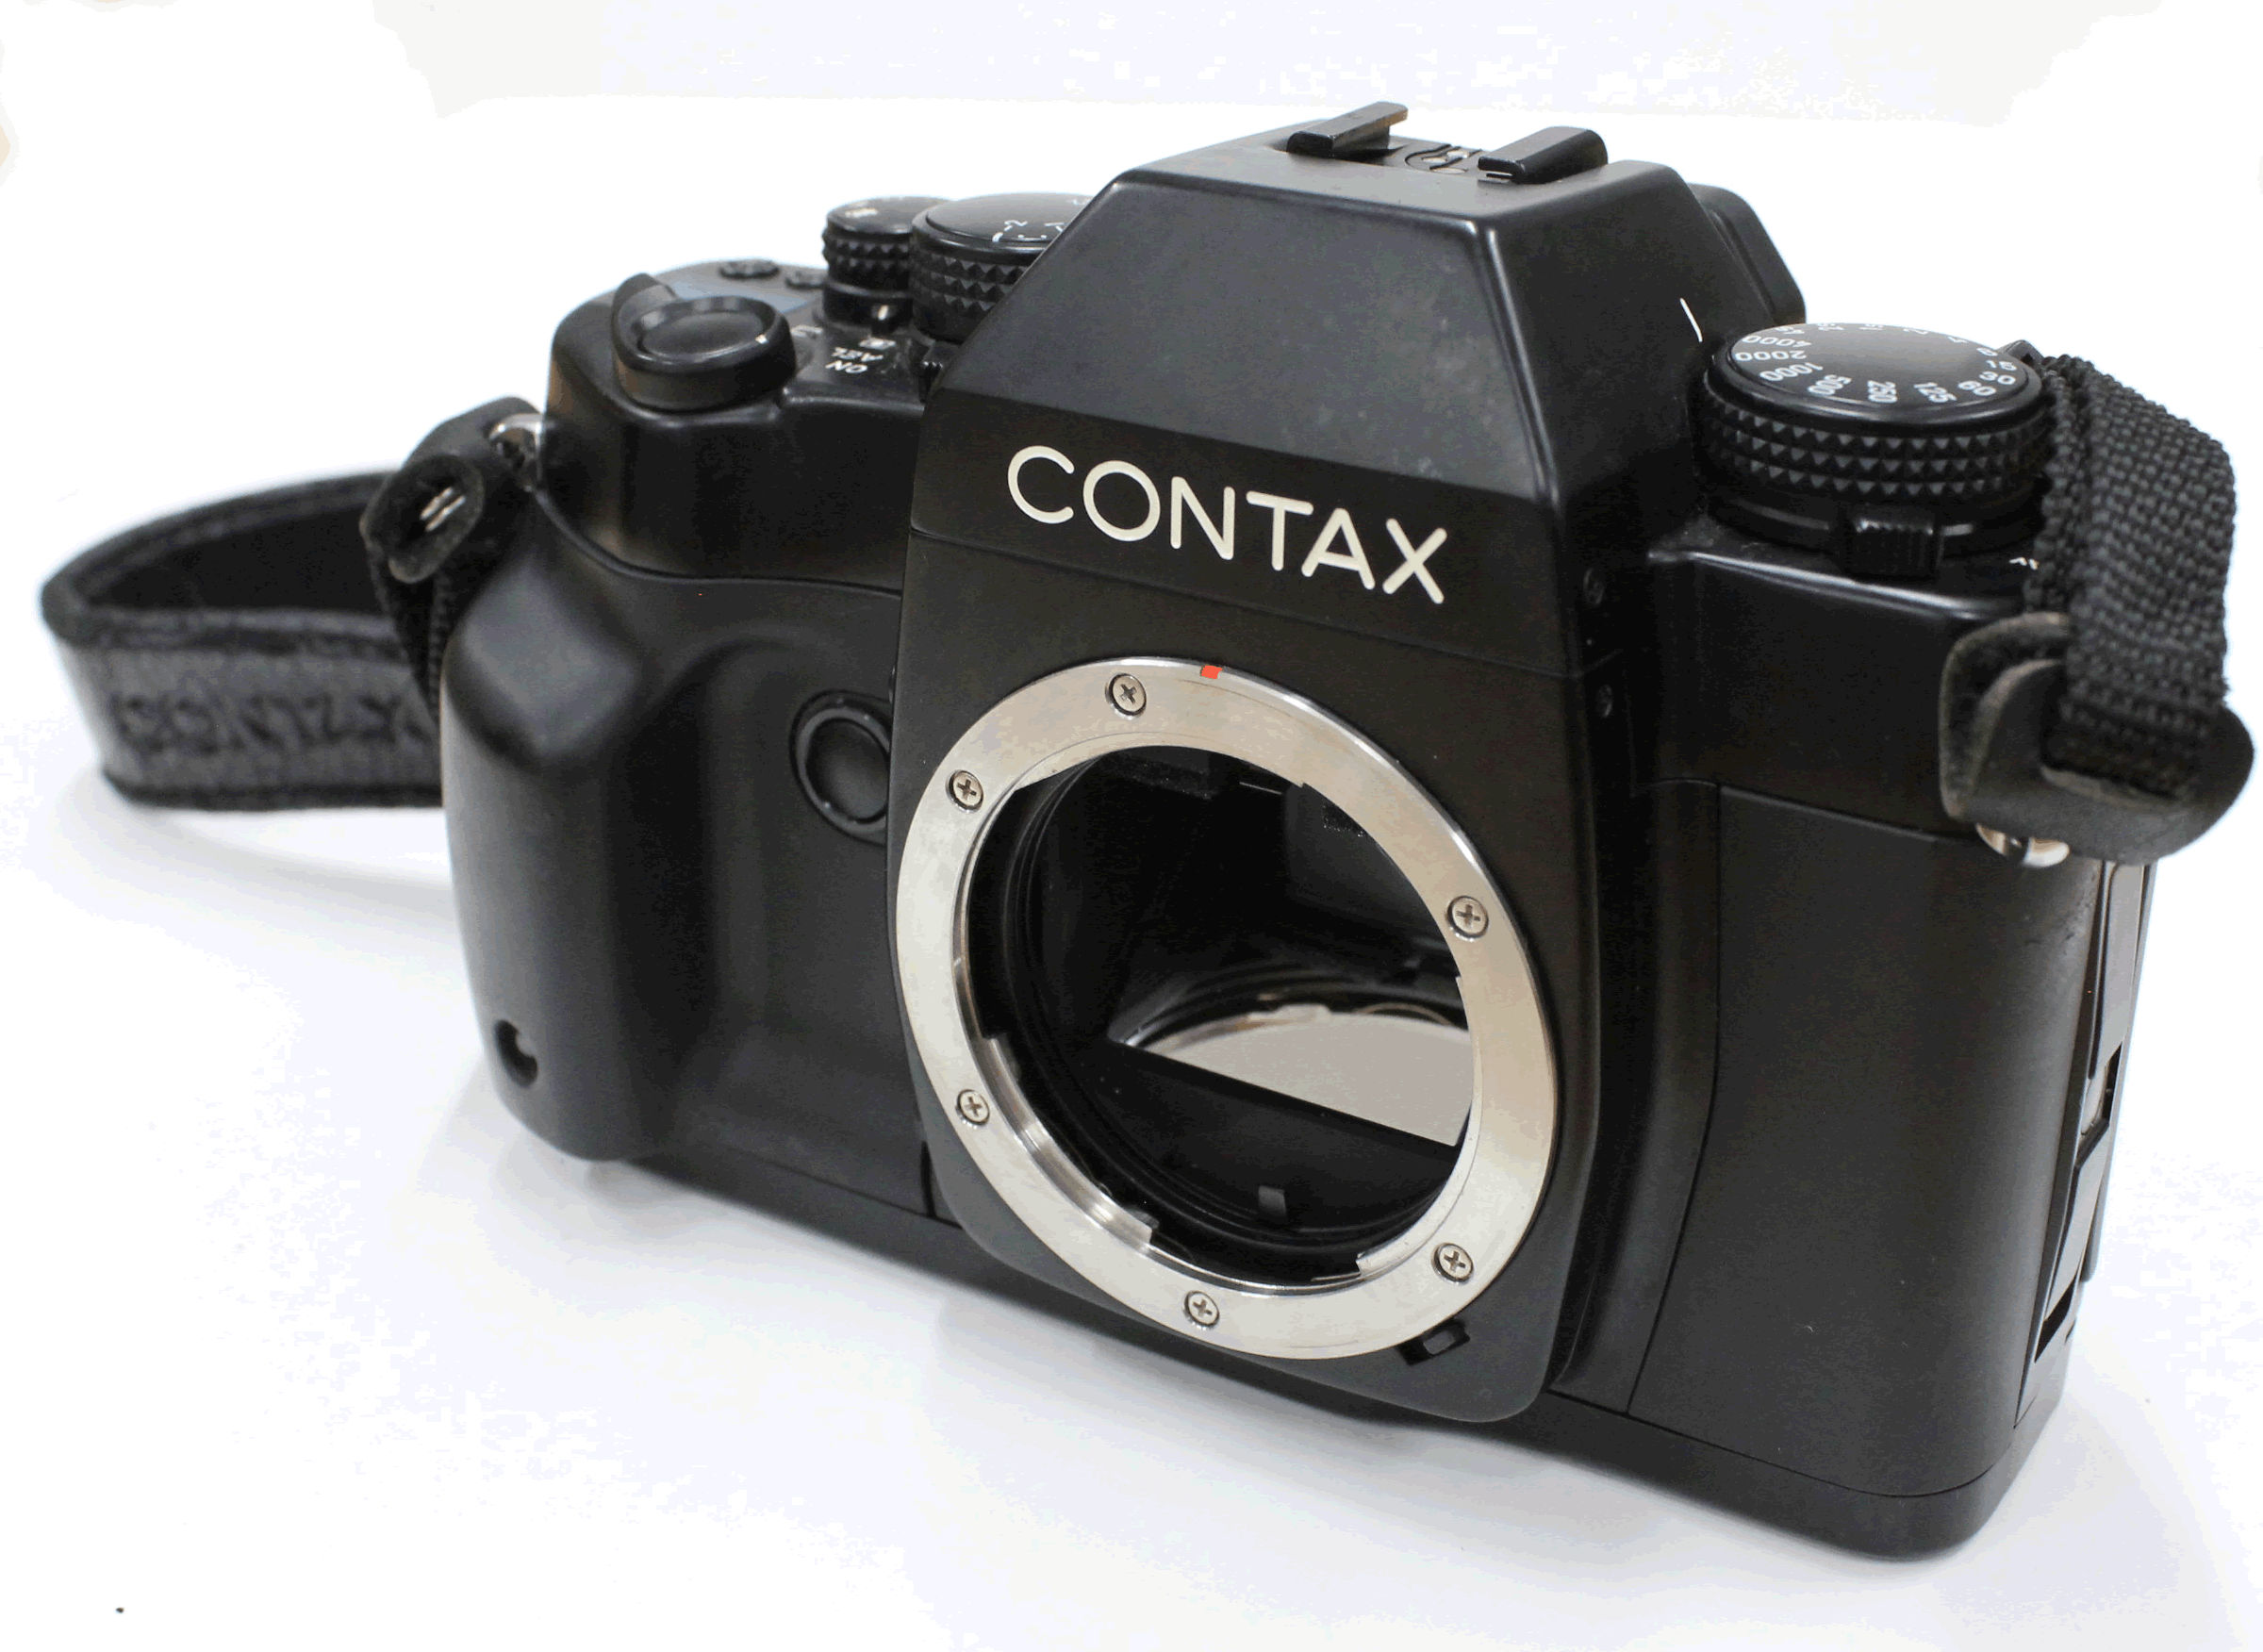 Contax 363 Contax Strobe TLA20 For Canon Camera Shoe Mount Flash Black From Japan 